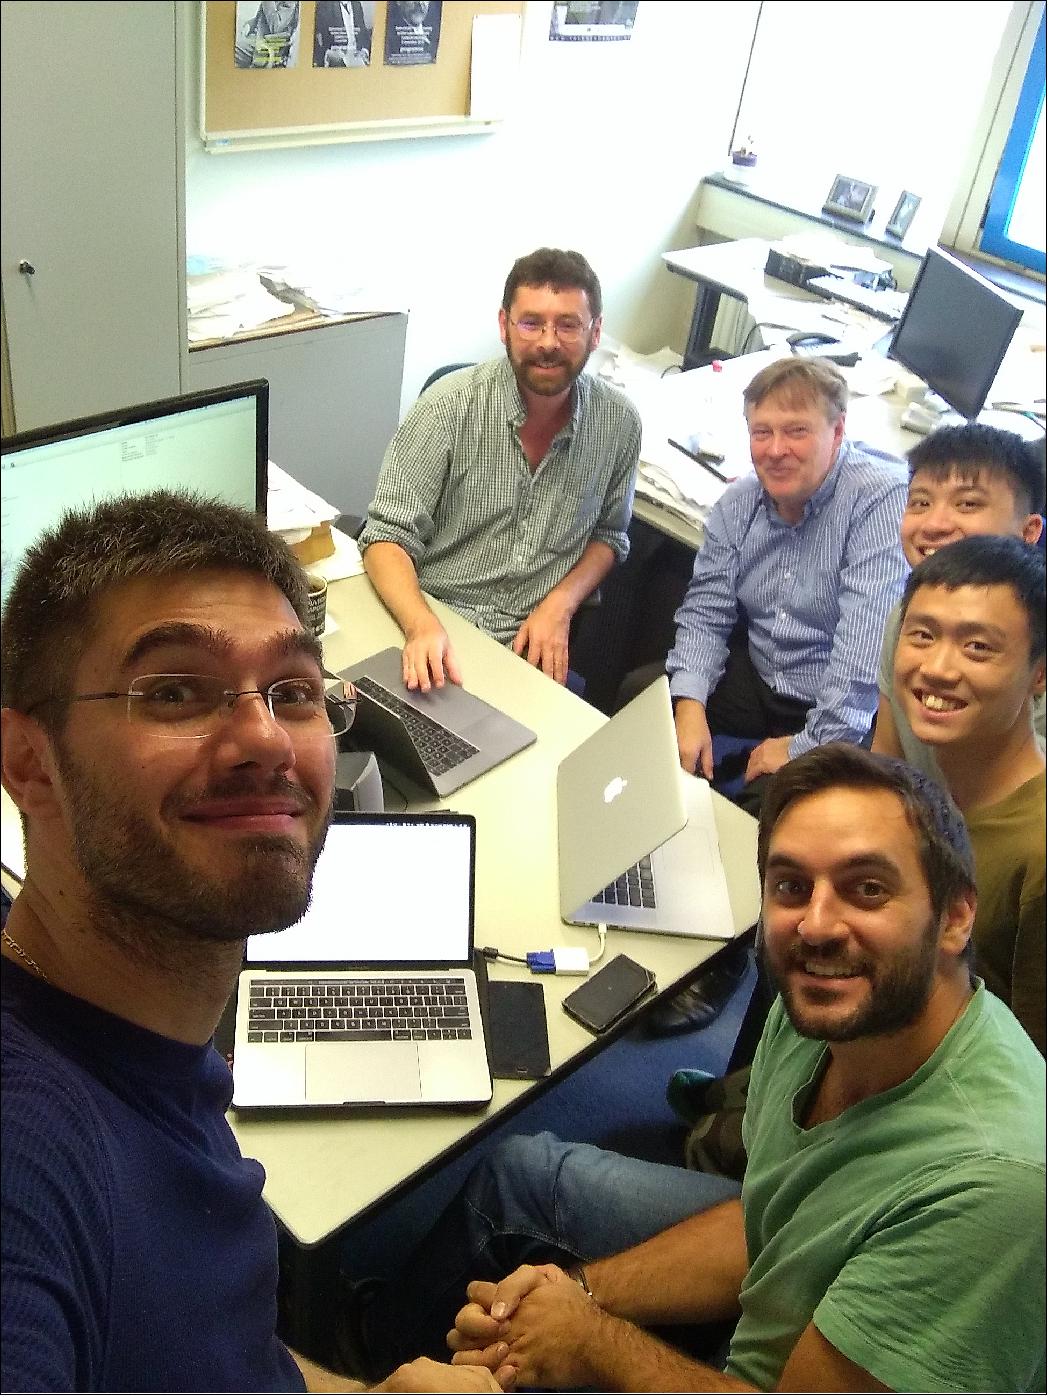 Figure 34: "The six happiest people in the world" on August 17, 2017. Salvatore Vitale (left) snapped this photo moments after first seeing the LLO scan. The tell-tale trace of gravitational waves generated by merging neutron stars was clearly visible. Clockwise from top: Chris van den Broeck, Jo van den Brand, Peter Pang, Ka Wa Tsang, and Michalis Agathos (image credit: Salvo Vitale)